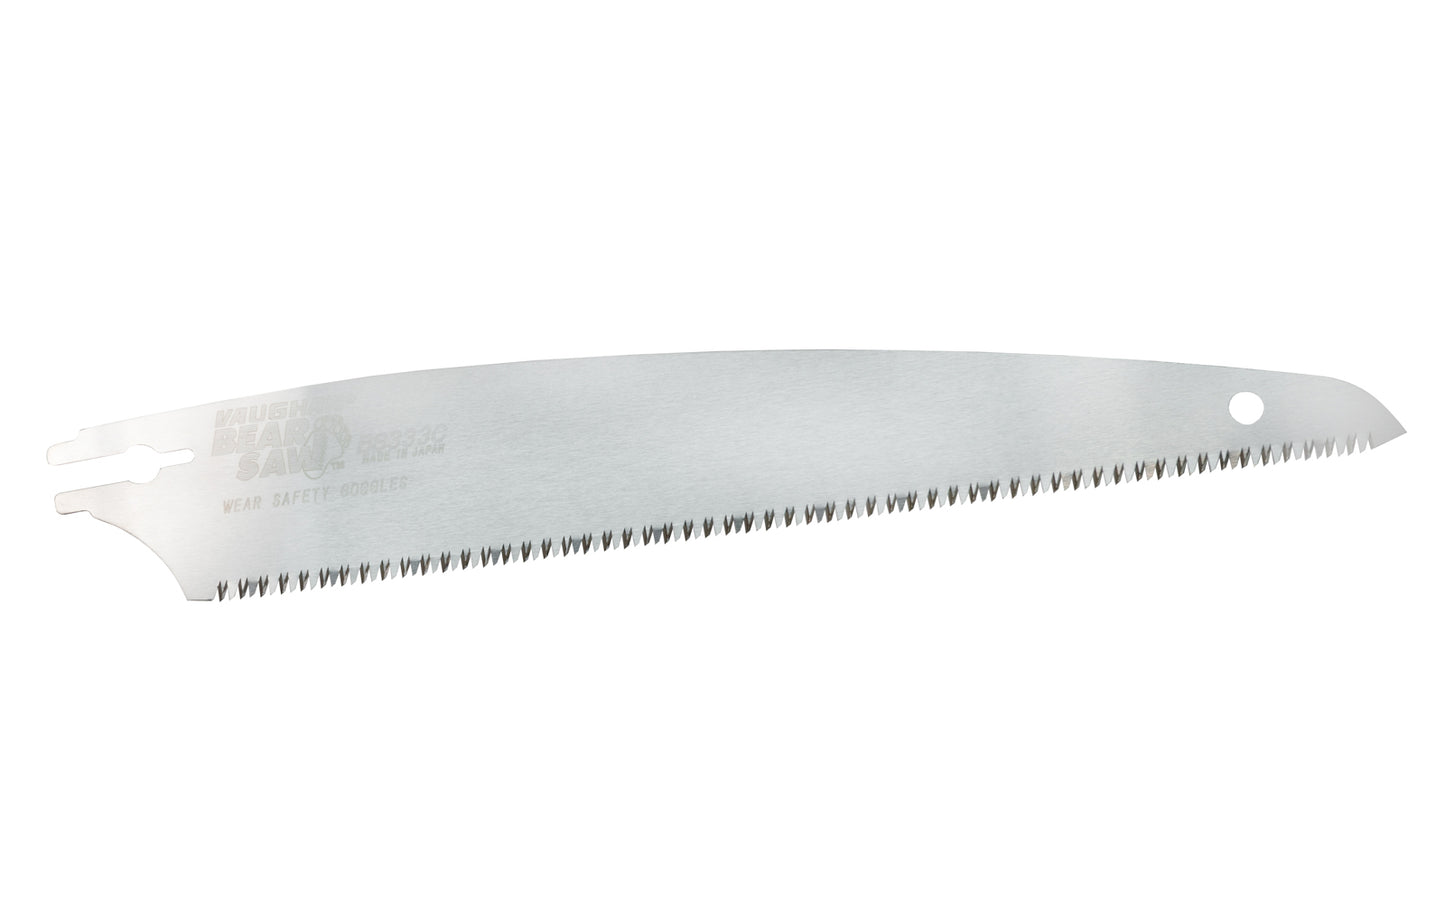 Made in Japan - Vaughan ~ 333RBC - Crosscut Teeth: 9 TPI ~ Heavy duty extra coarse pull-saw ~ Impulse Hardened Teeth ~ Removable Blade ~ For timber framing & construction, house framing - Vaughan Bear Saw 333 - Coarse Pull Saw - 051218569124 - Vaughan Saw - Replacement Blade - Impulse Hardened Teeth - Coarse to Medium